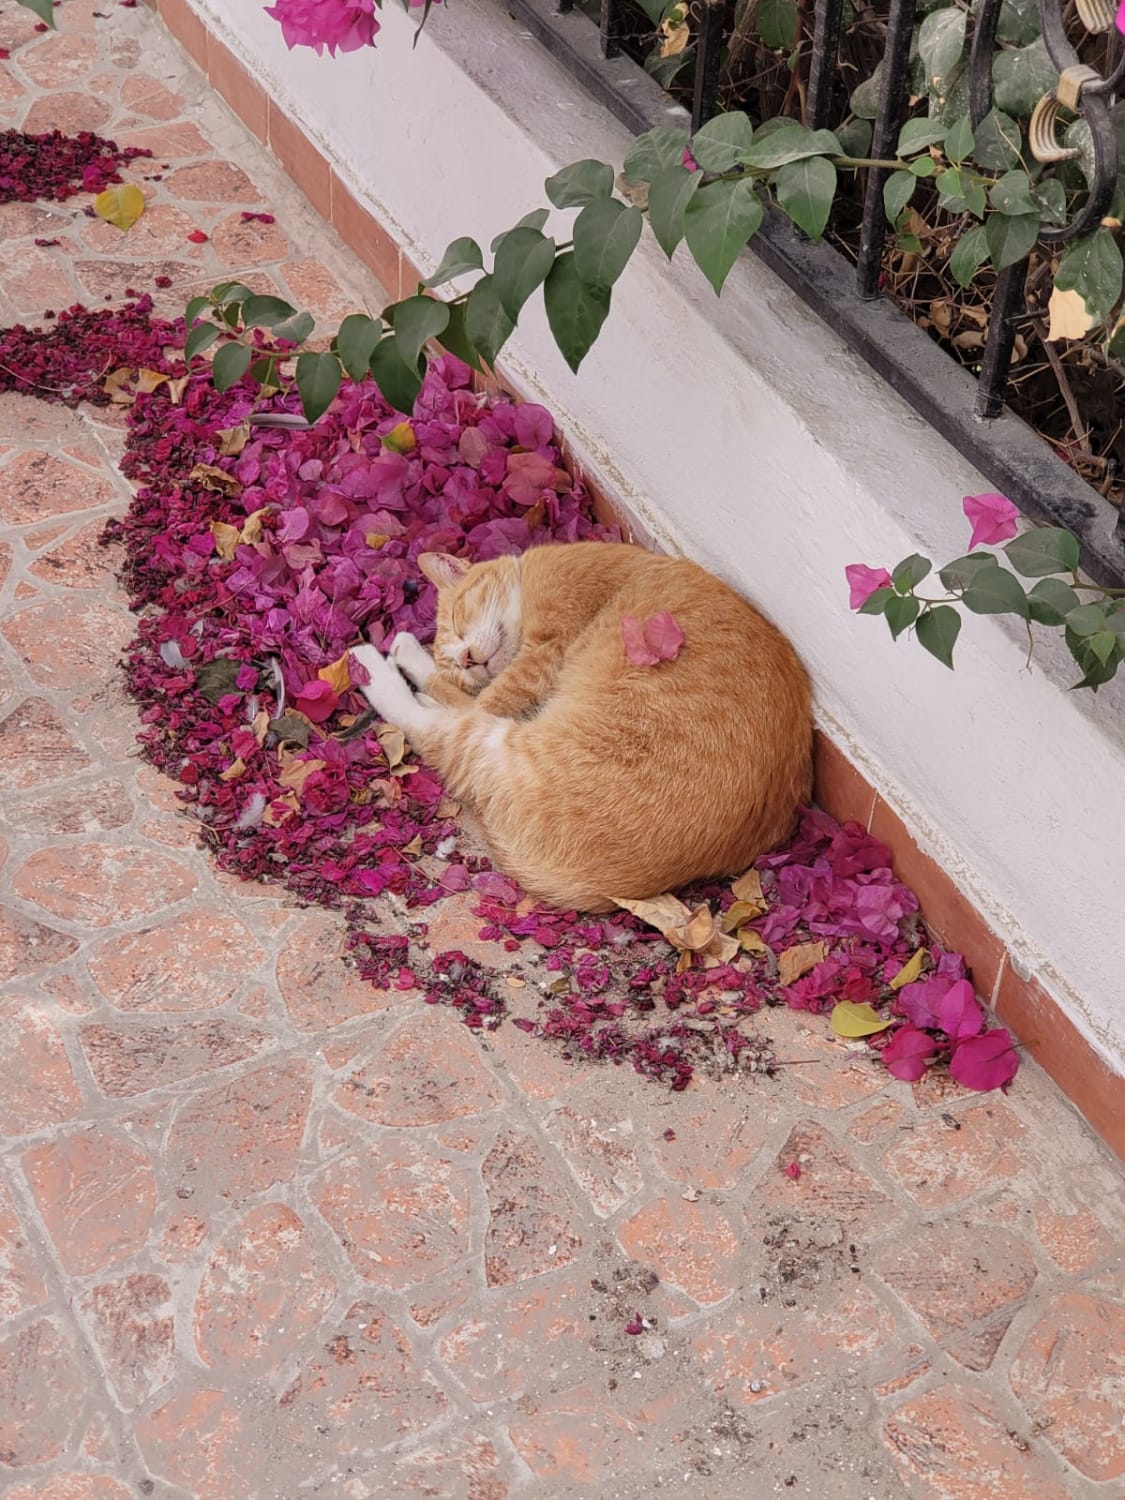 My mother caught this cat taking a nap on a bed of flowers.